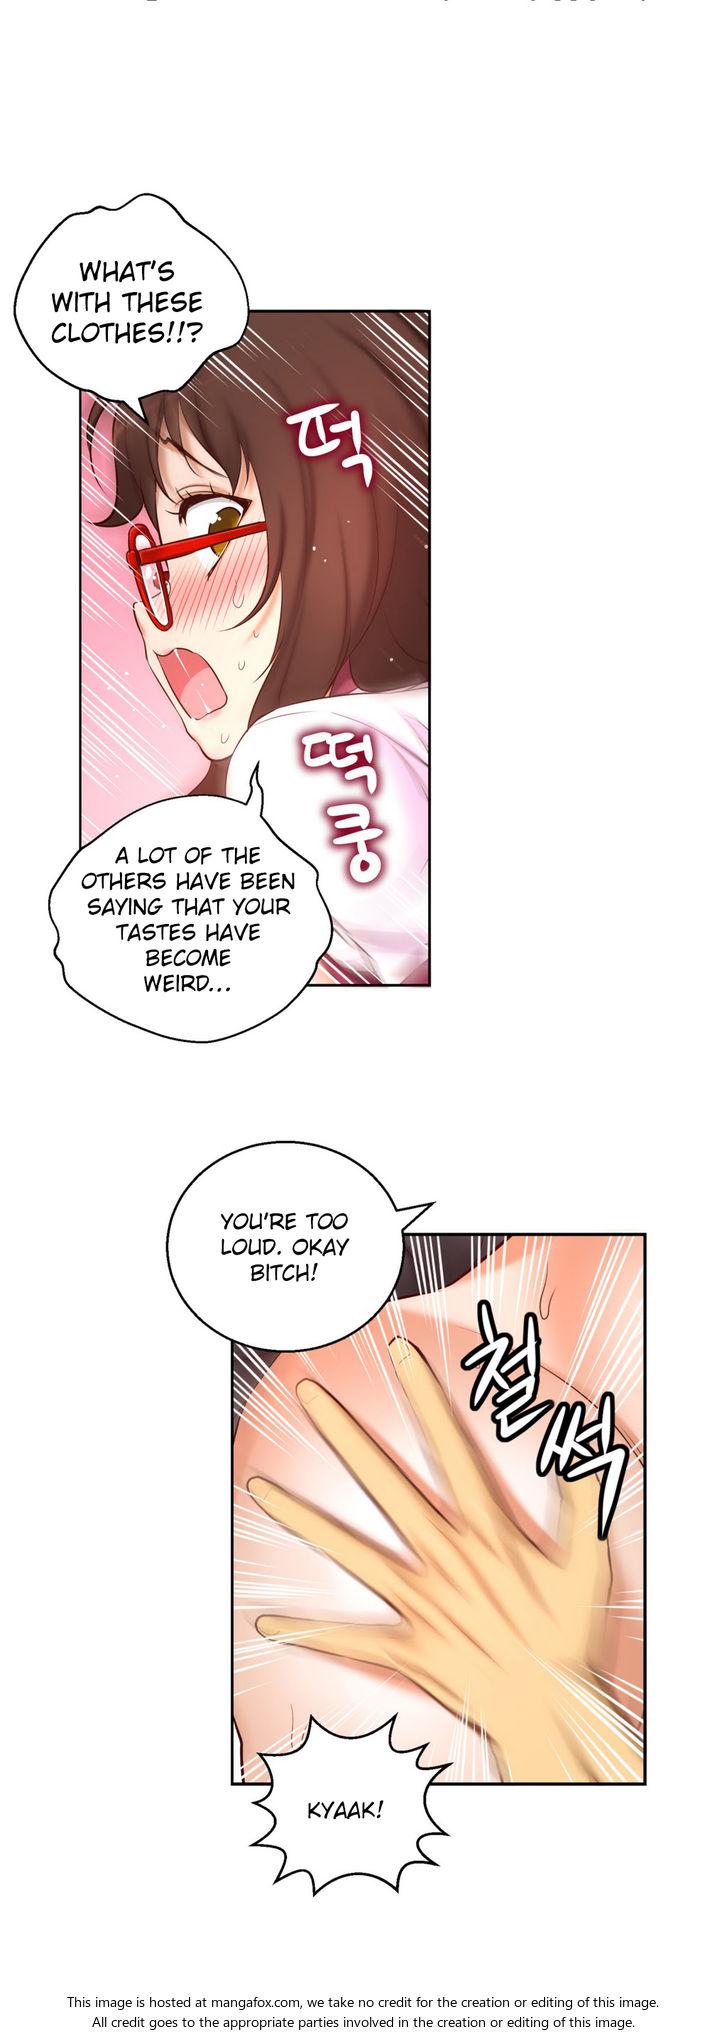 [Donggul Gom] She is Young (English) Part 1/2 958